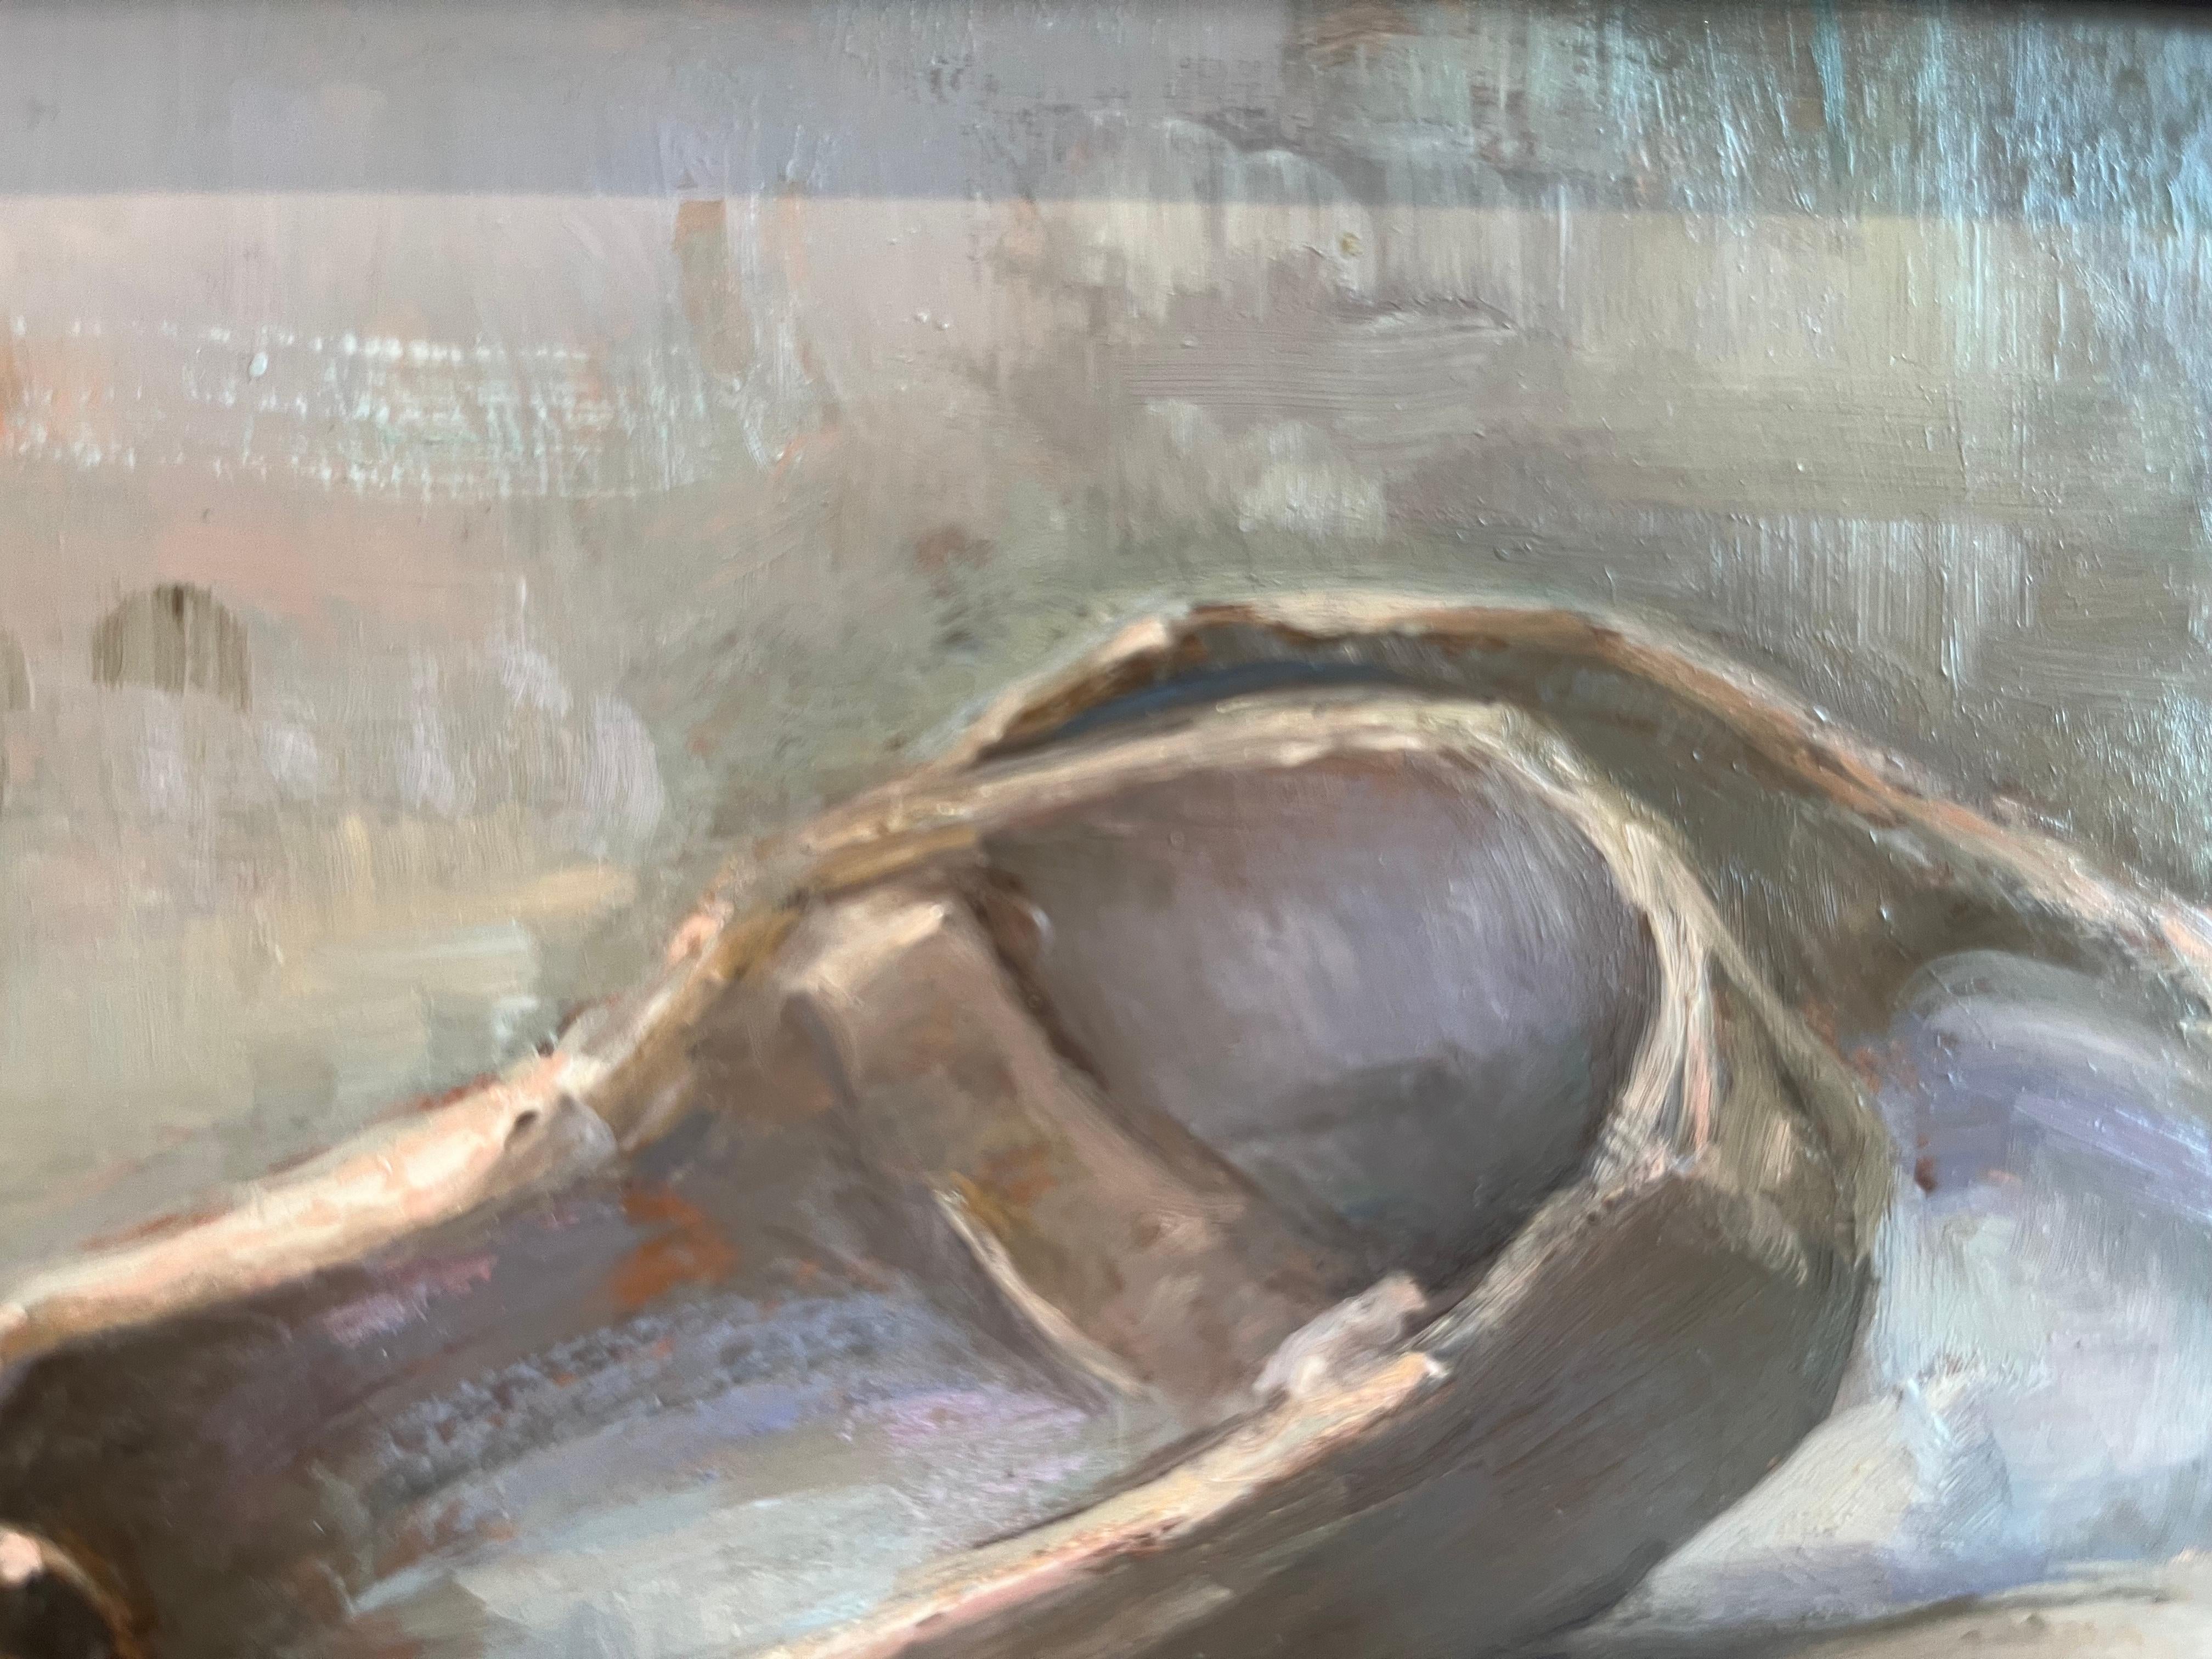 An expertly rendered pair of ballet slippers, from the classically trained painter, Melissa Franklin Sanchez. The dreamy background is created by Franklin Sanchez's unique choice to paint on copper rather than canvas. 